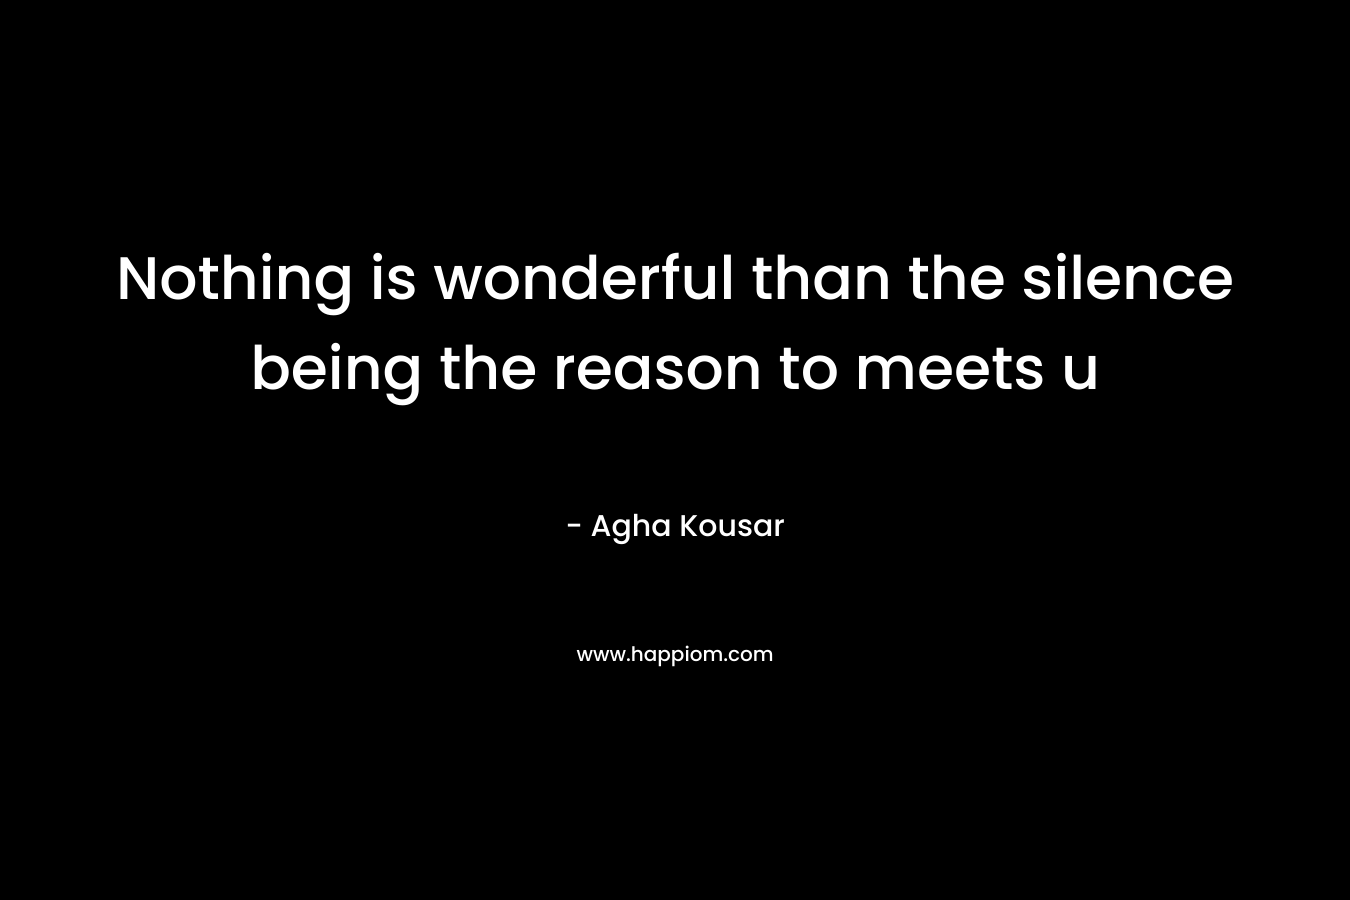 Nothing is wonderful than the silence being the reason to meets u